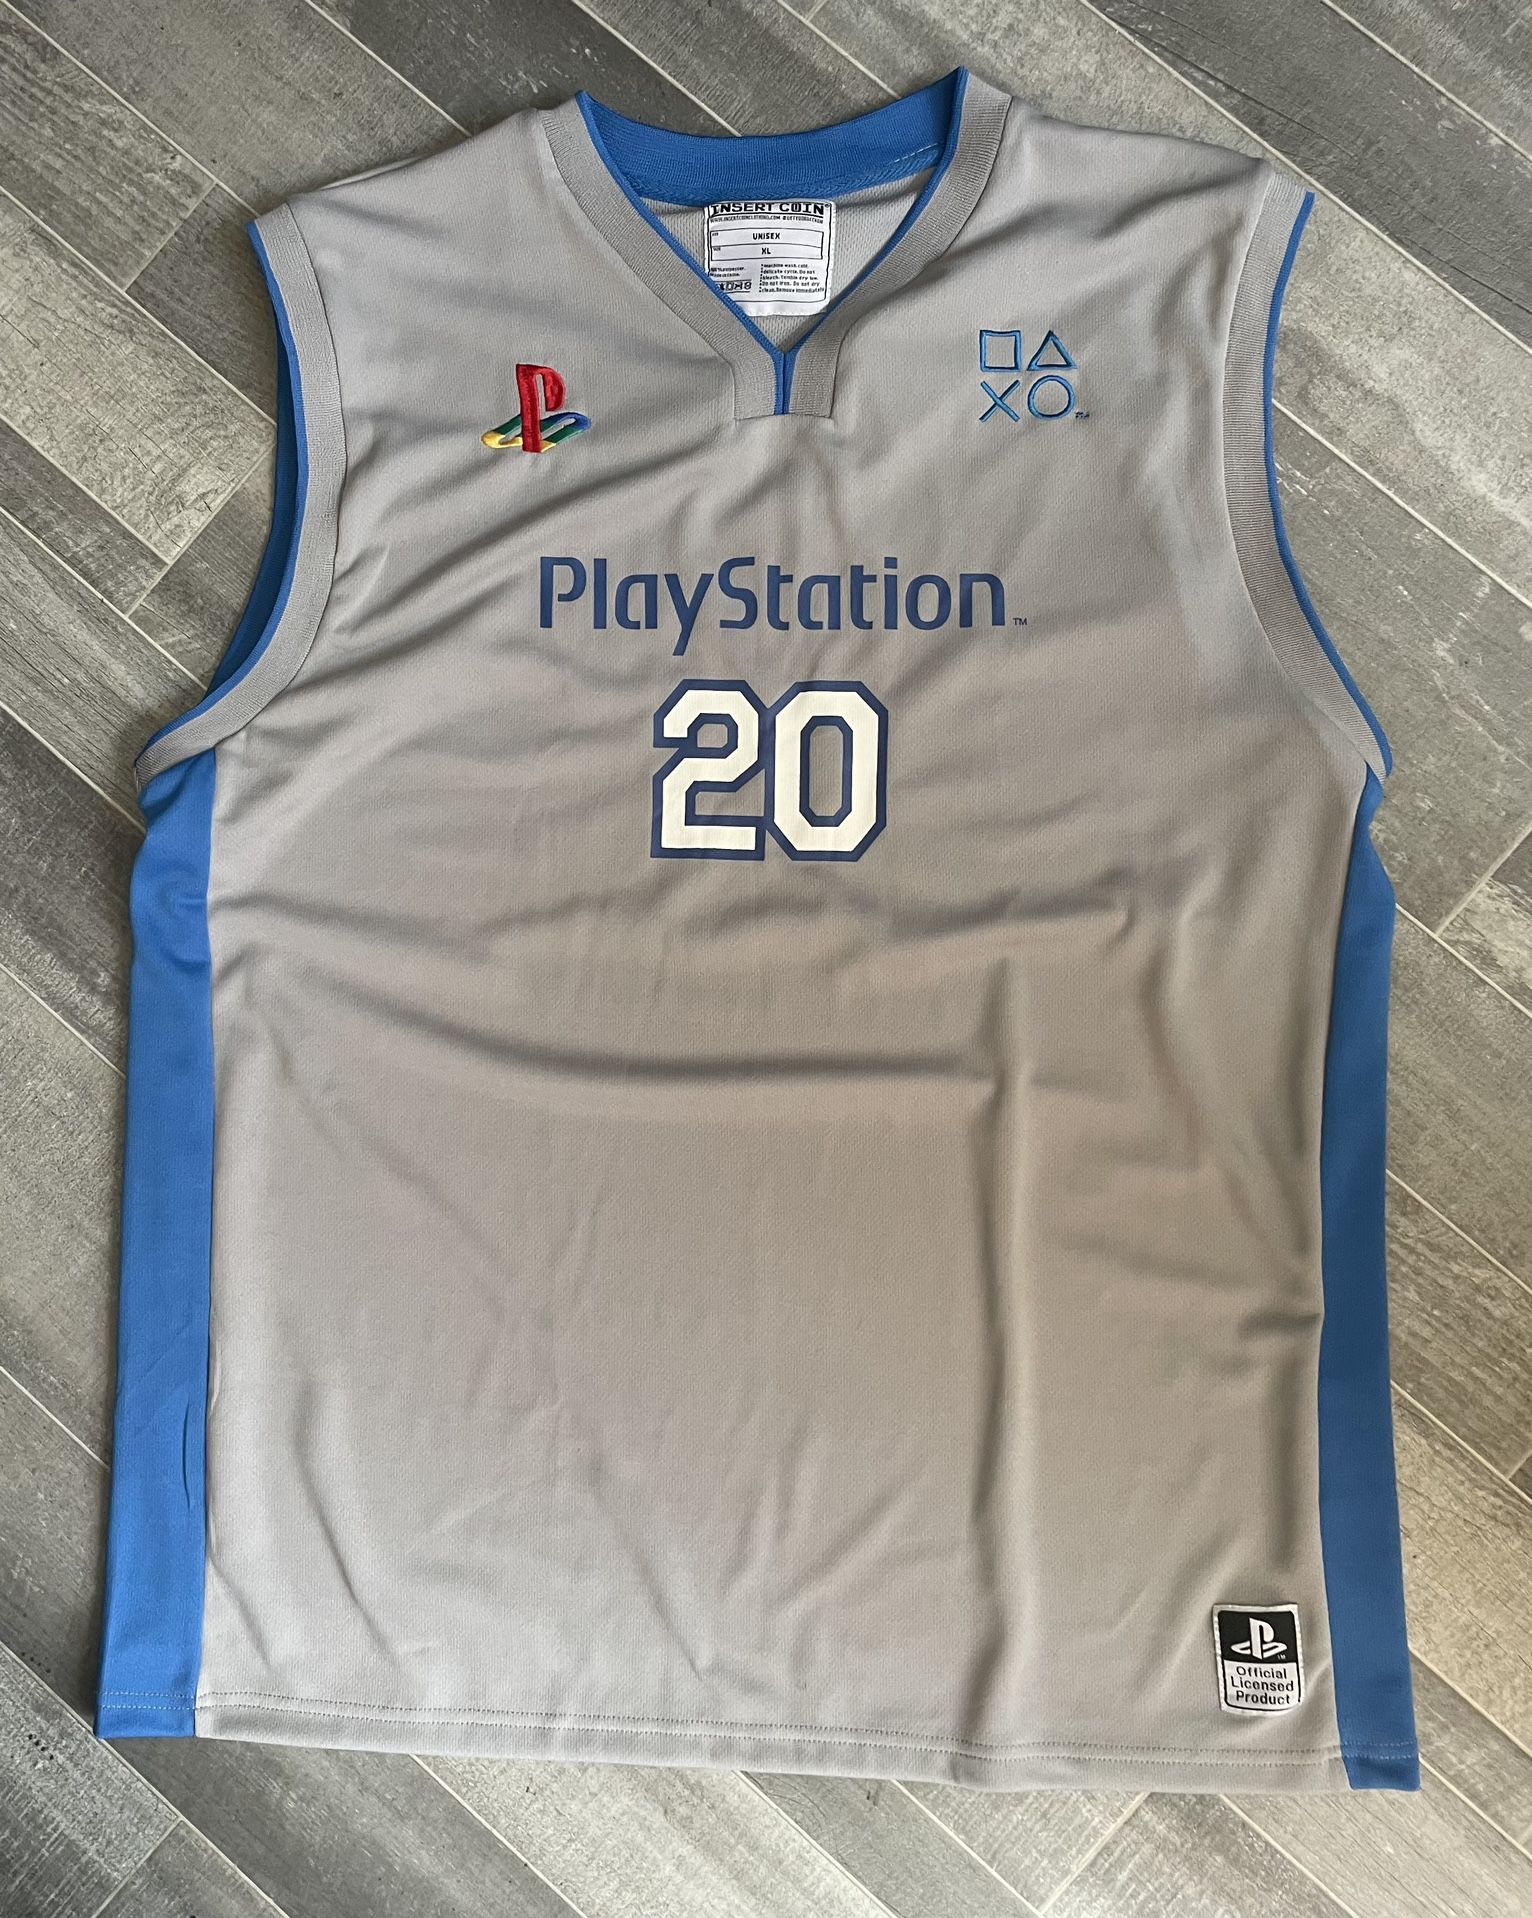 Rare INSERT COIN Playstation #20 Licensed Basketball Jersey 2000s Size XL